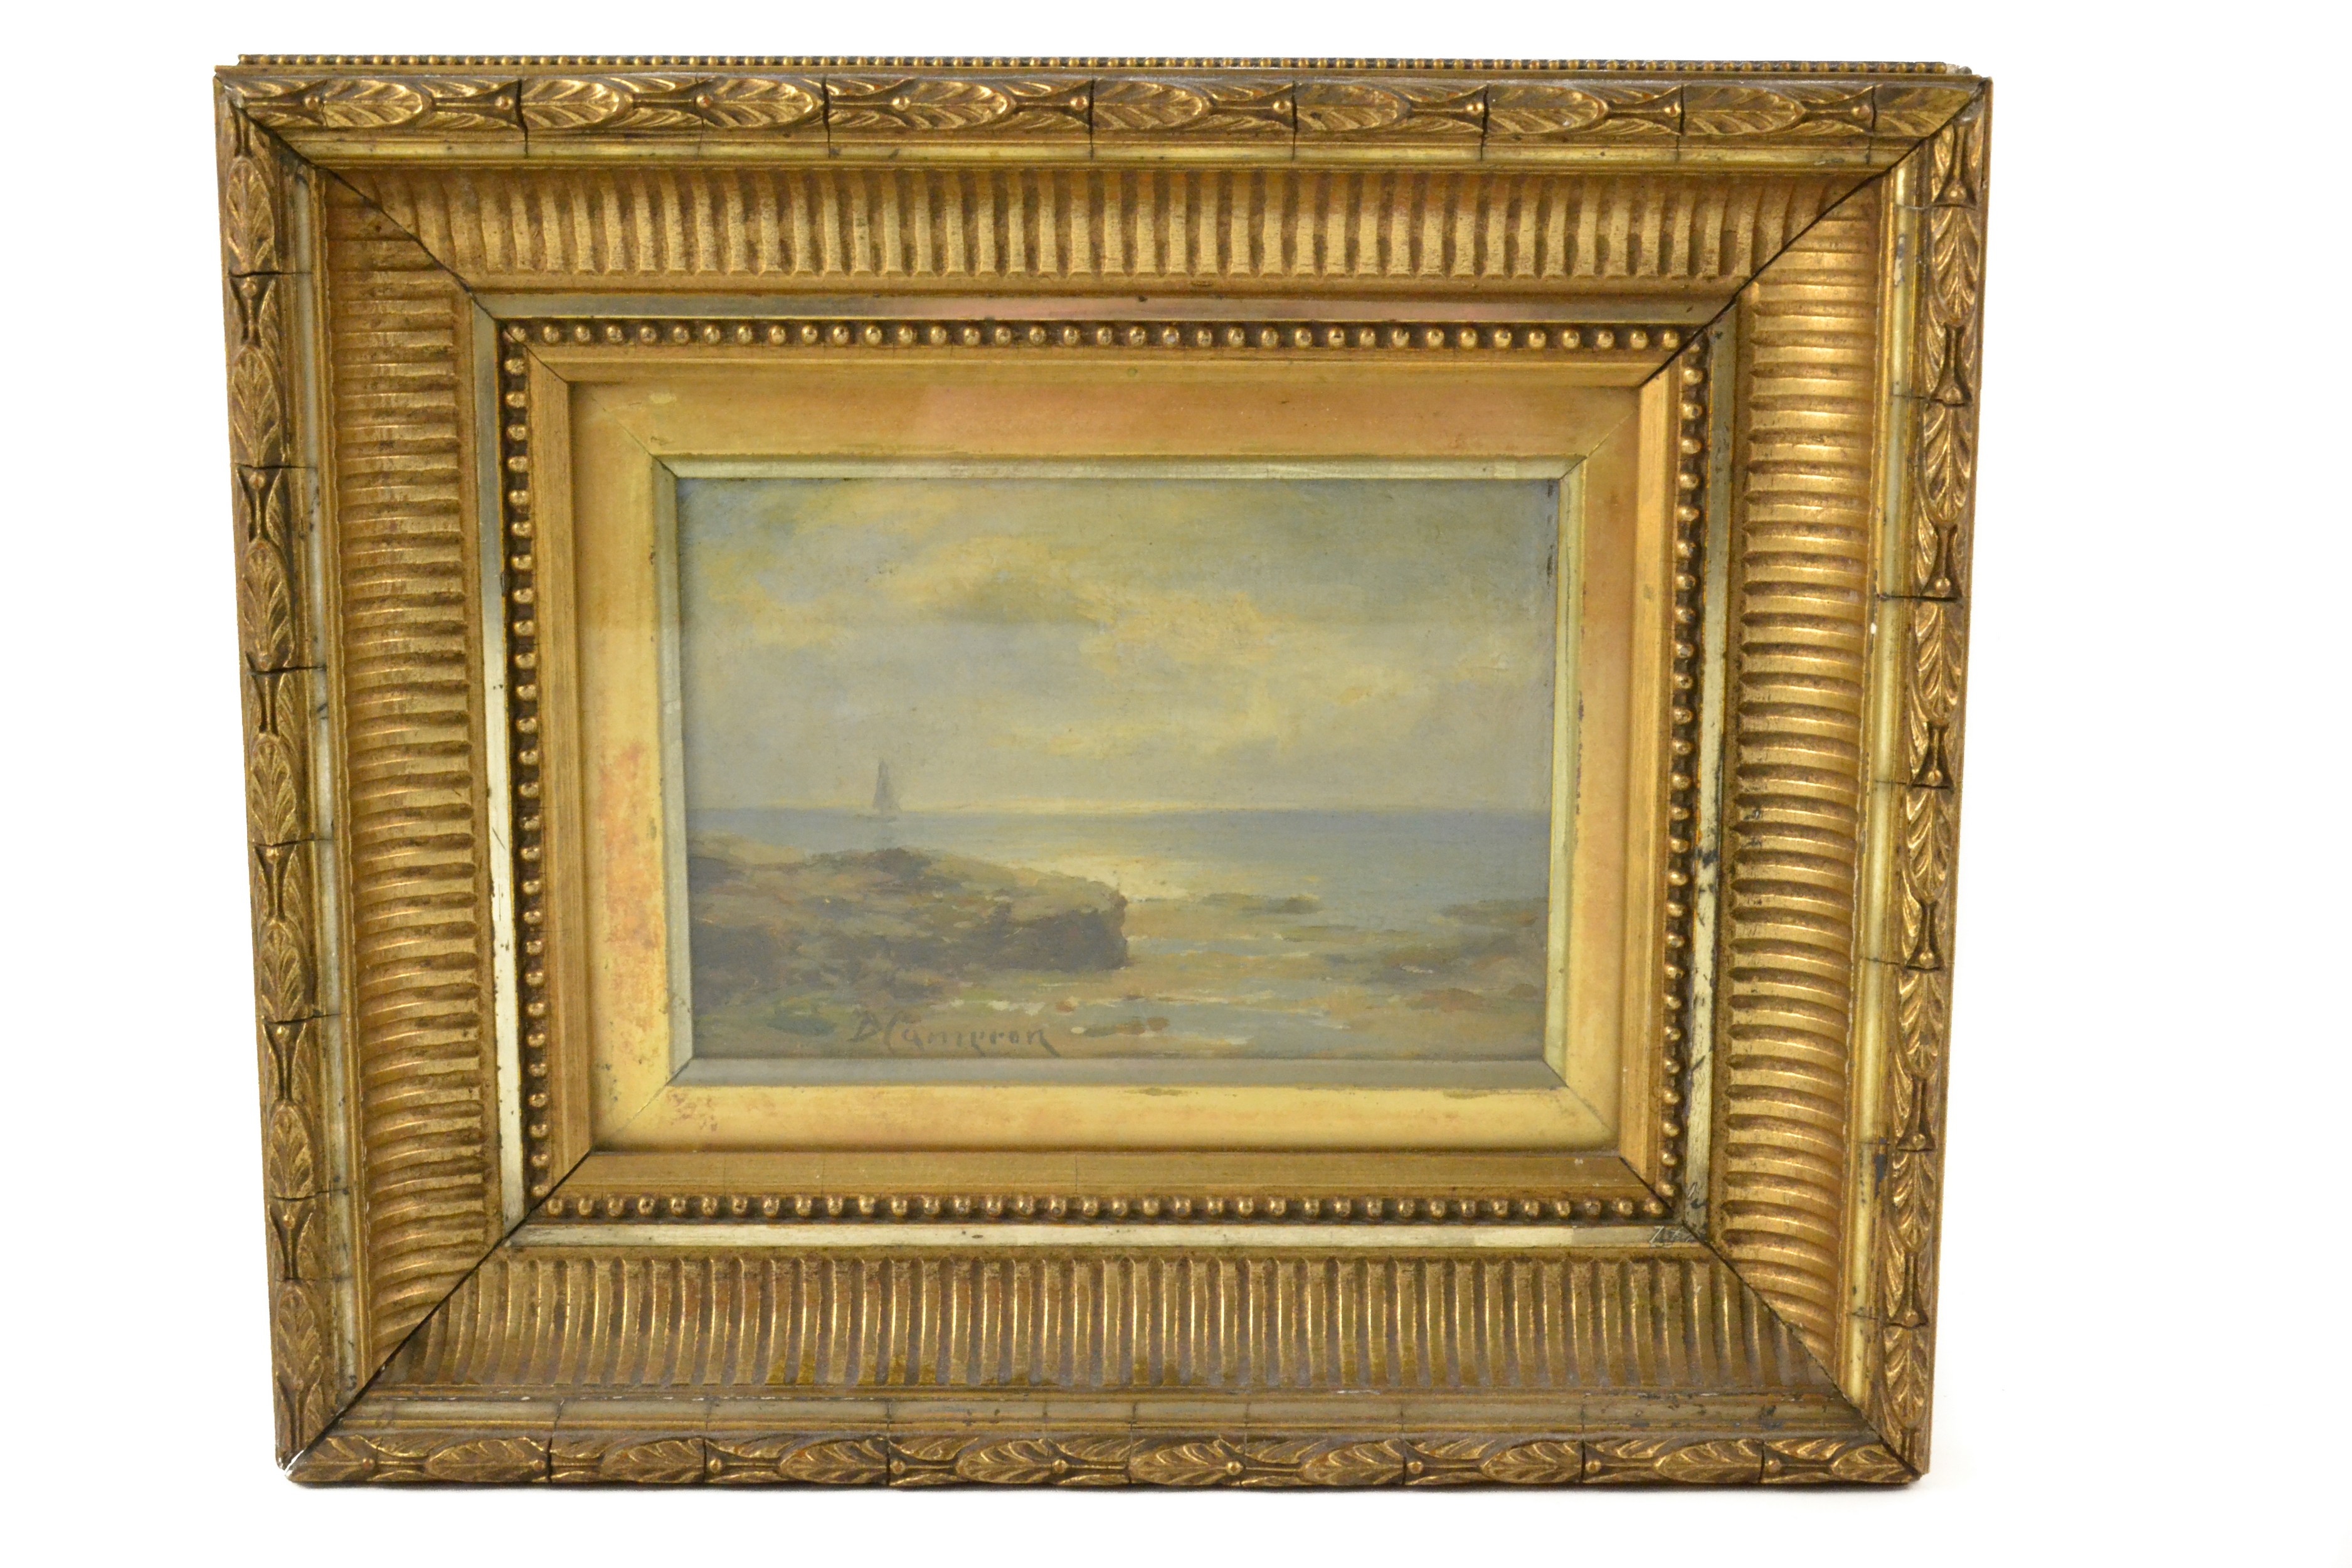 Sir David Young Cameron RA, Scottish Seascape, oil on board, signed, (10.5 x 15cm approx) - Image 2 of 4